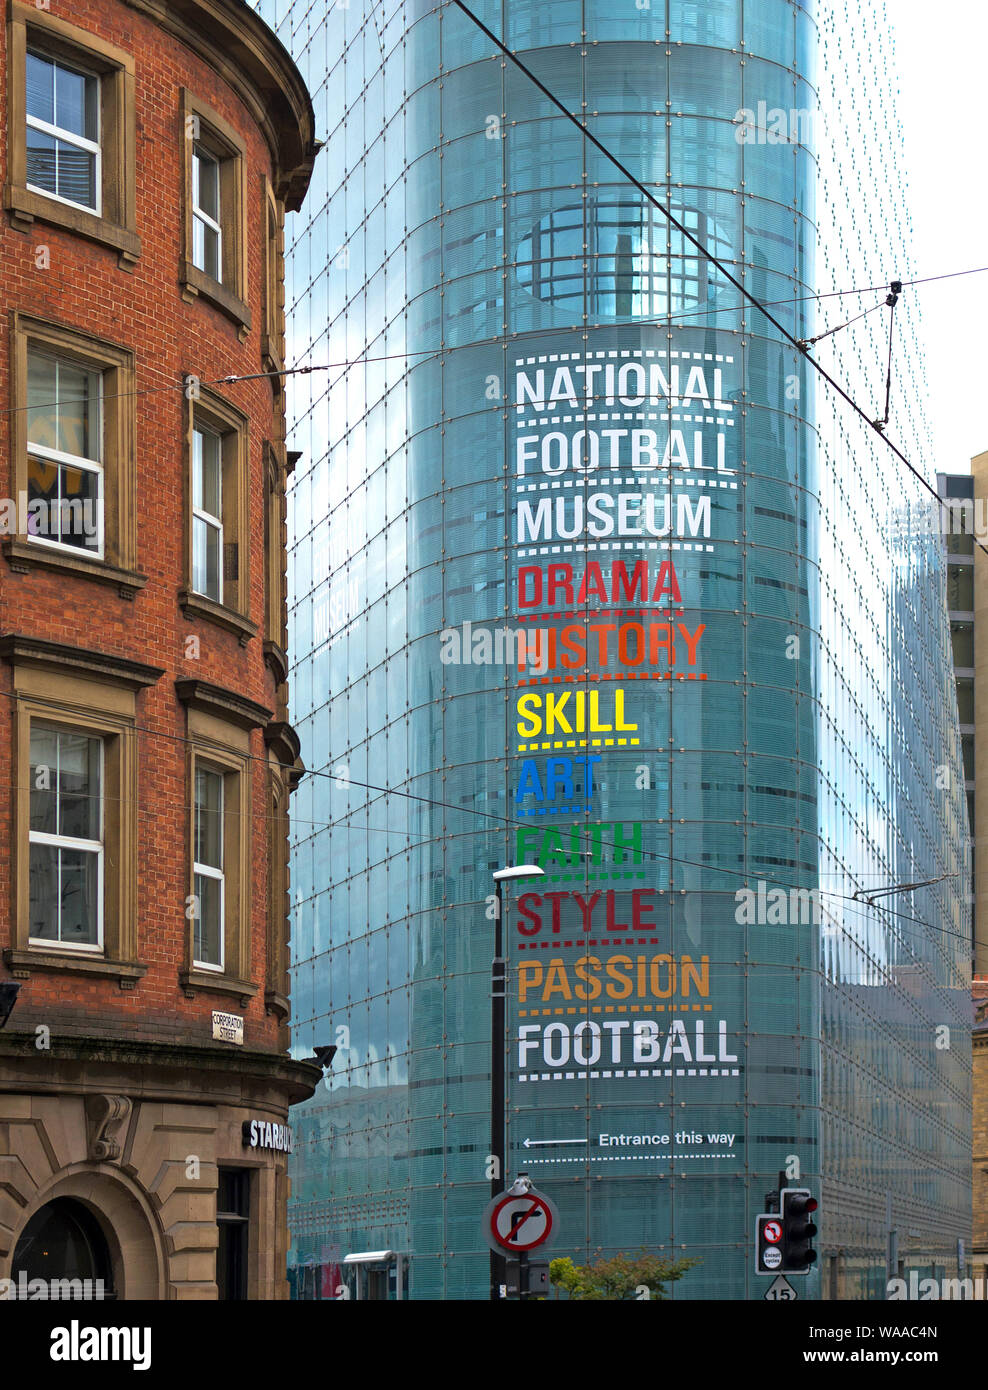 Die National Football Museum in Manchester, England, UK. Stockfoto